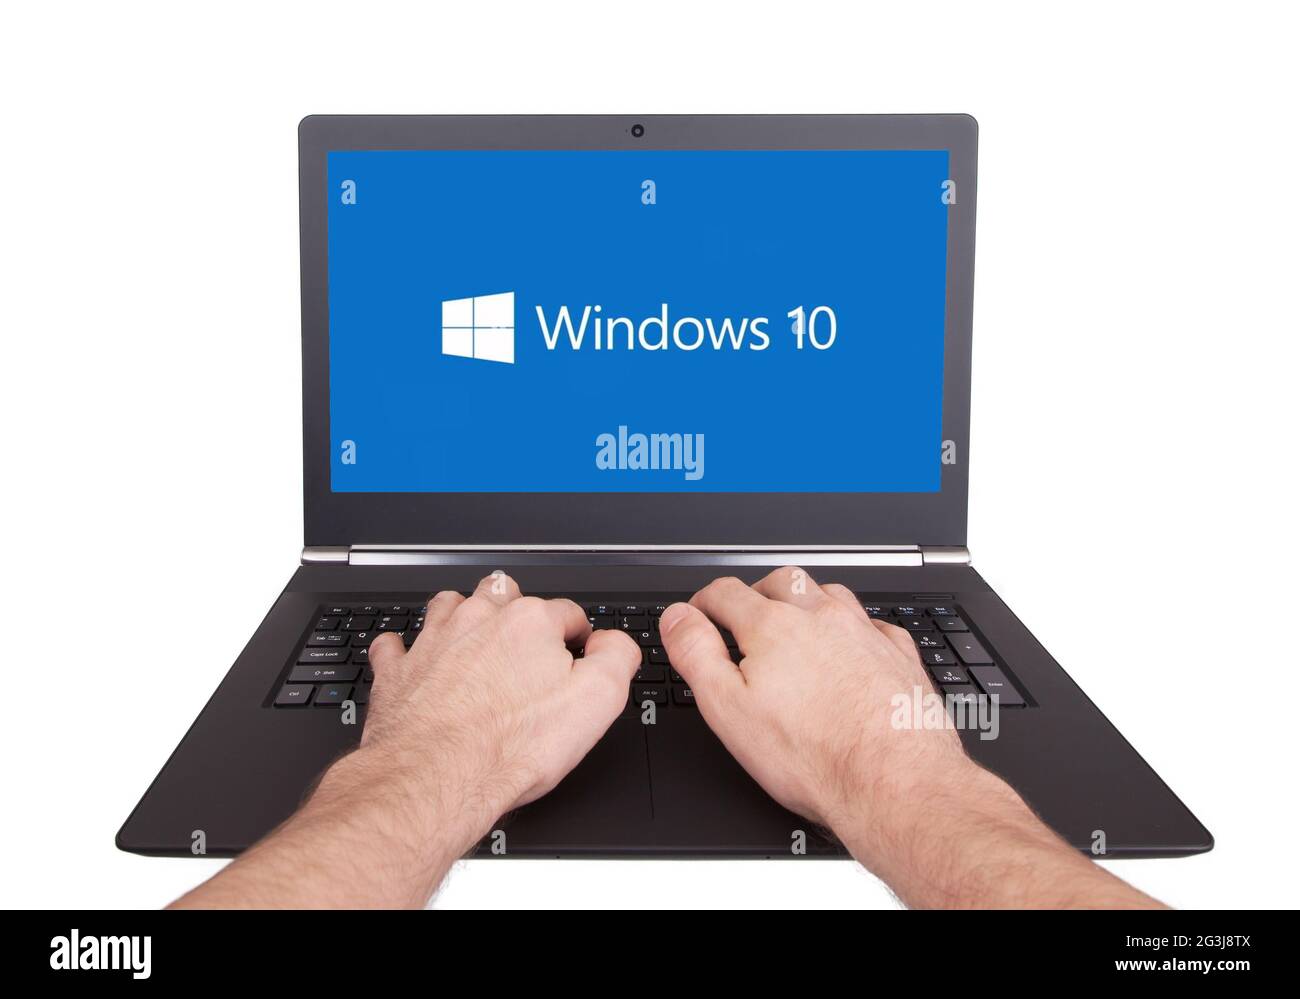 HEERENVEEN, NETHERLANDS, June 6, 2015: Laptop computer with Windows 10 logo. Windows 10 is the new version of Windows OS by Micr Stock Photo